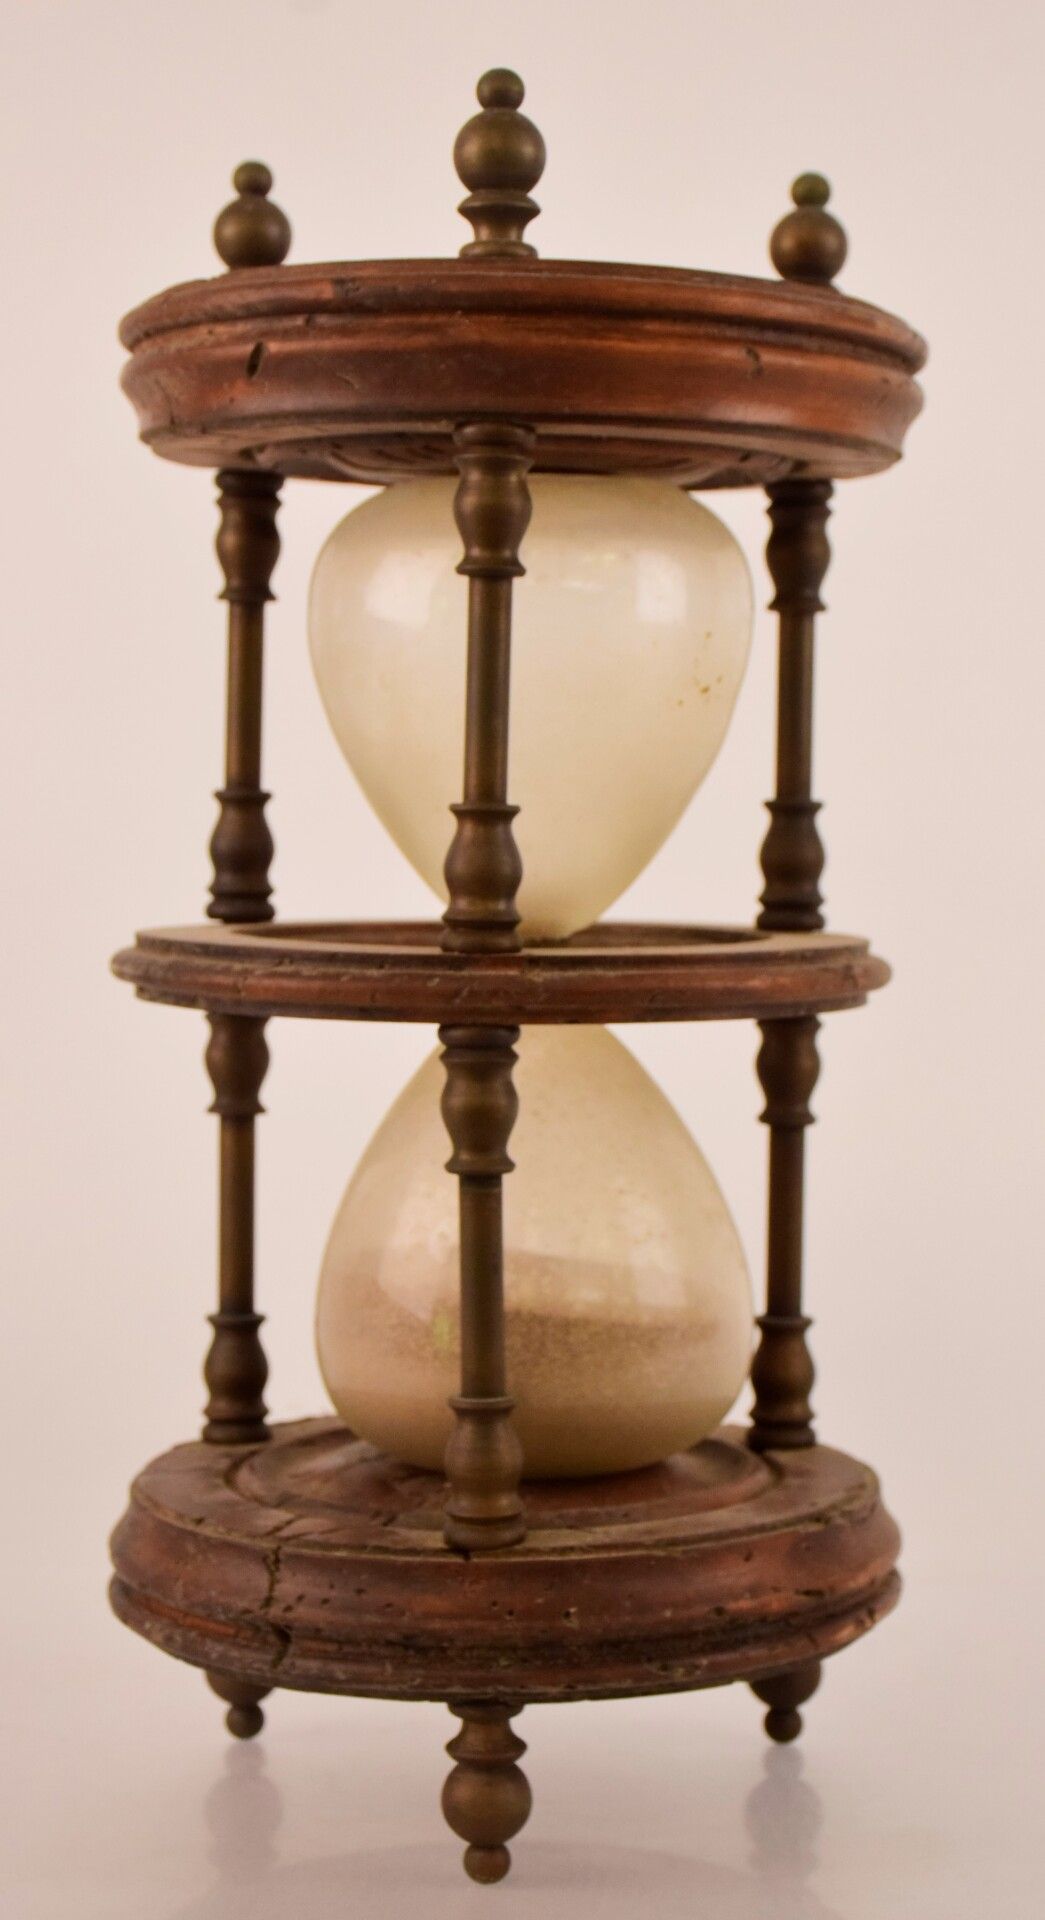 Null Large hourglass in wood, brass and glass.

Height: 40 cm - Diameter: 20 cm